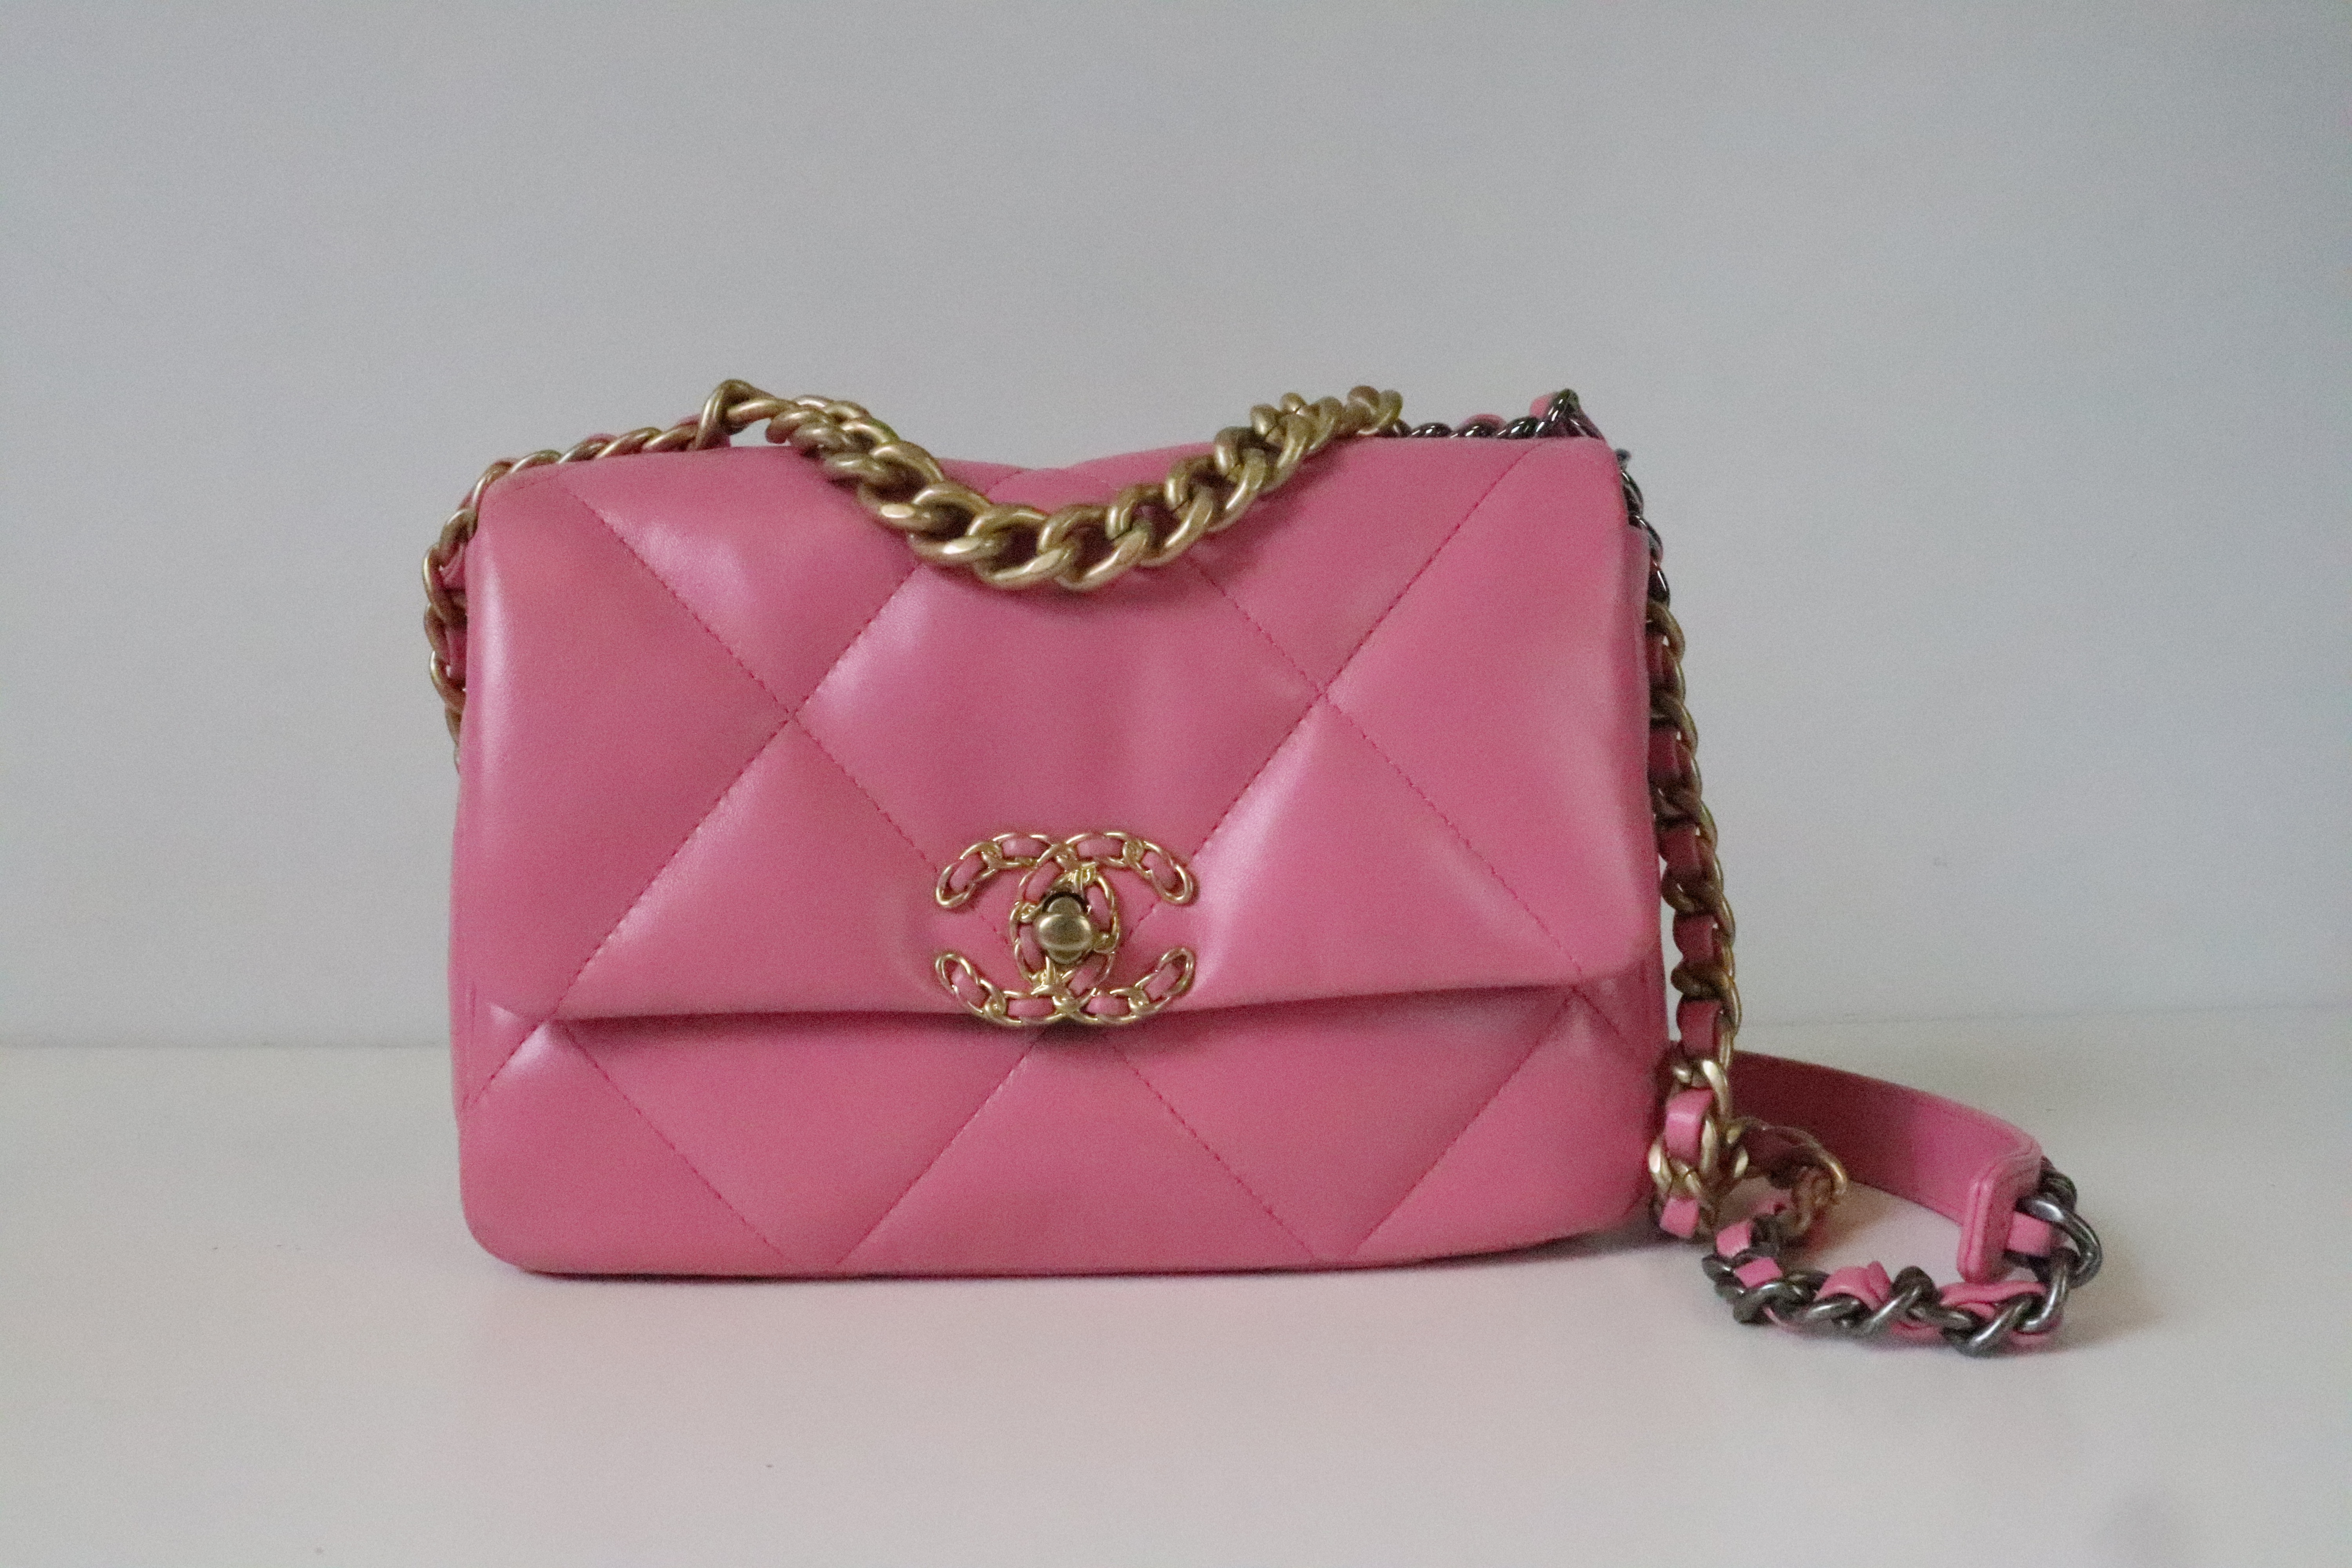 Chanel 19 Small, 21S Pink, New in Box